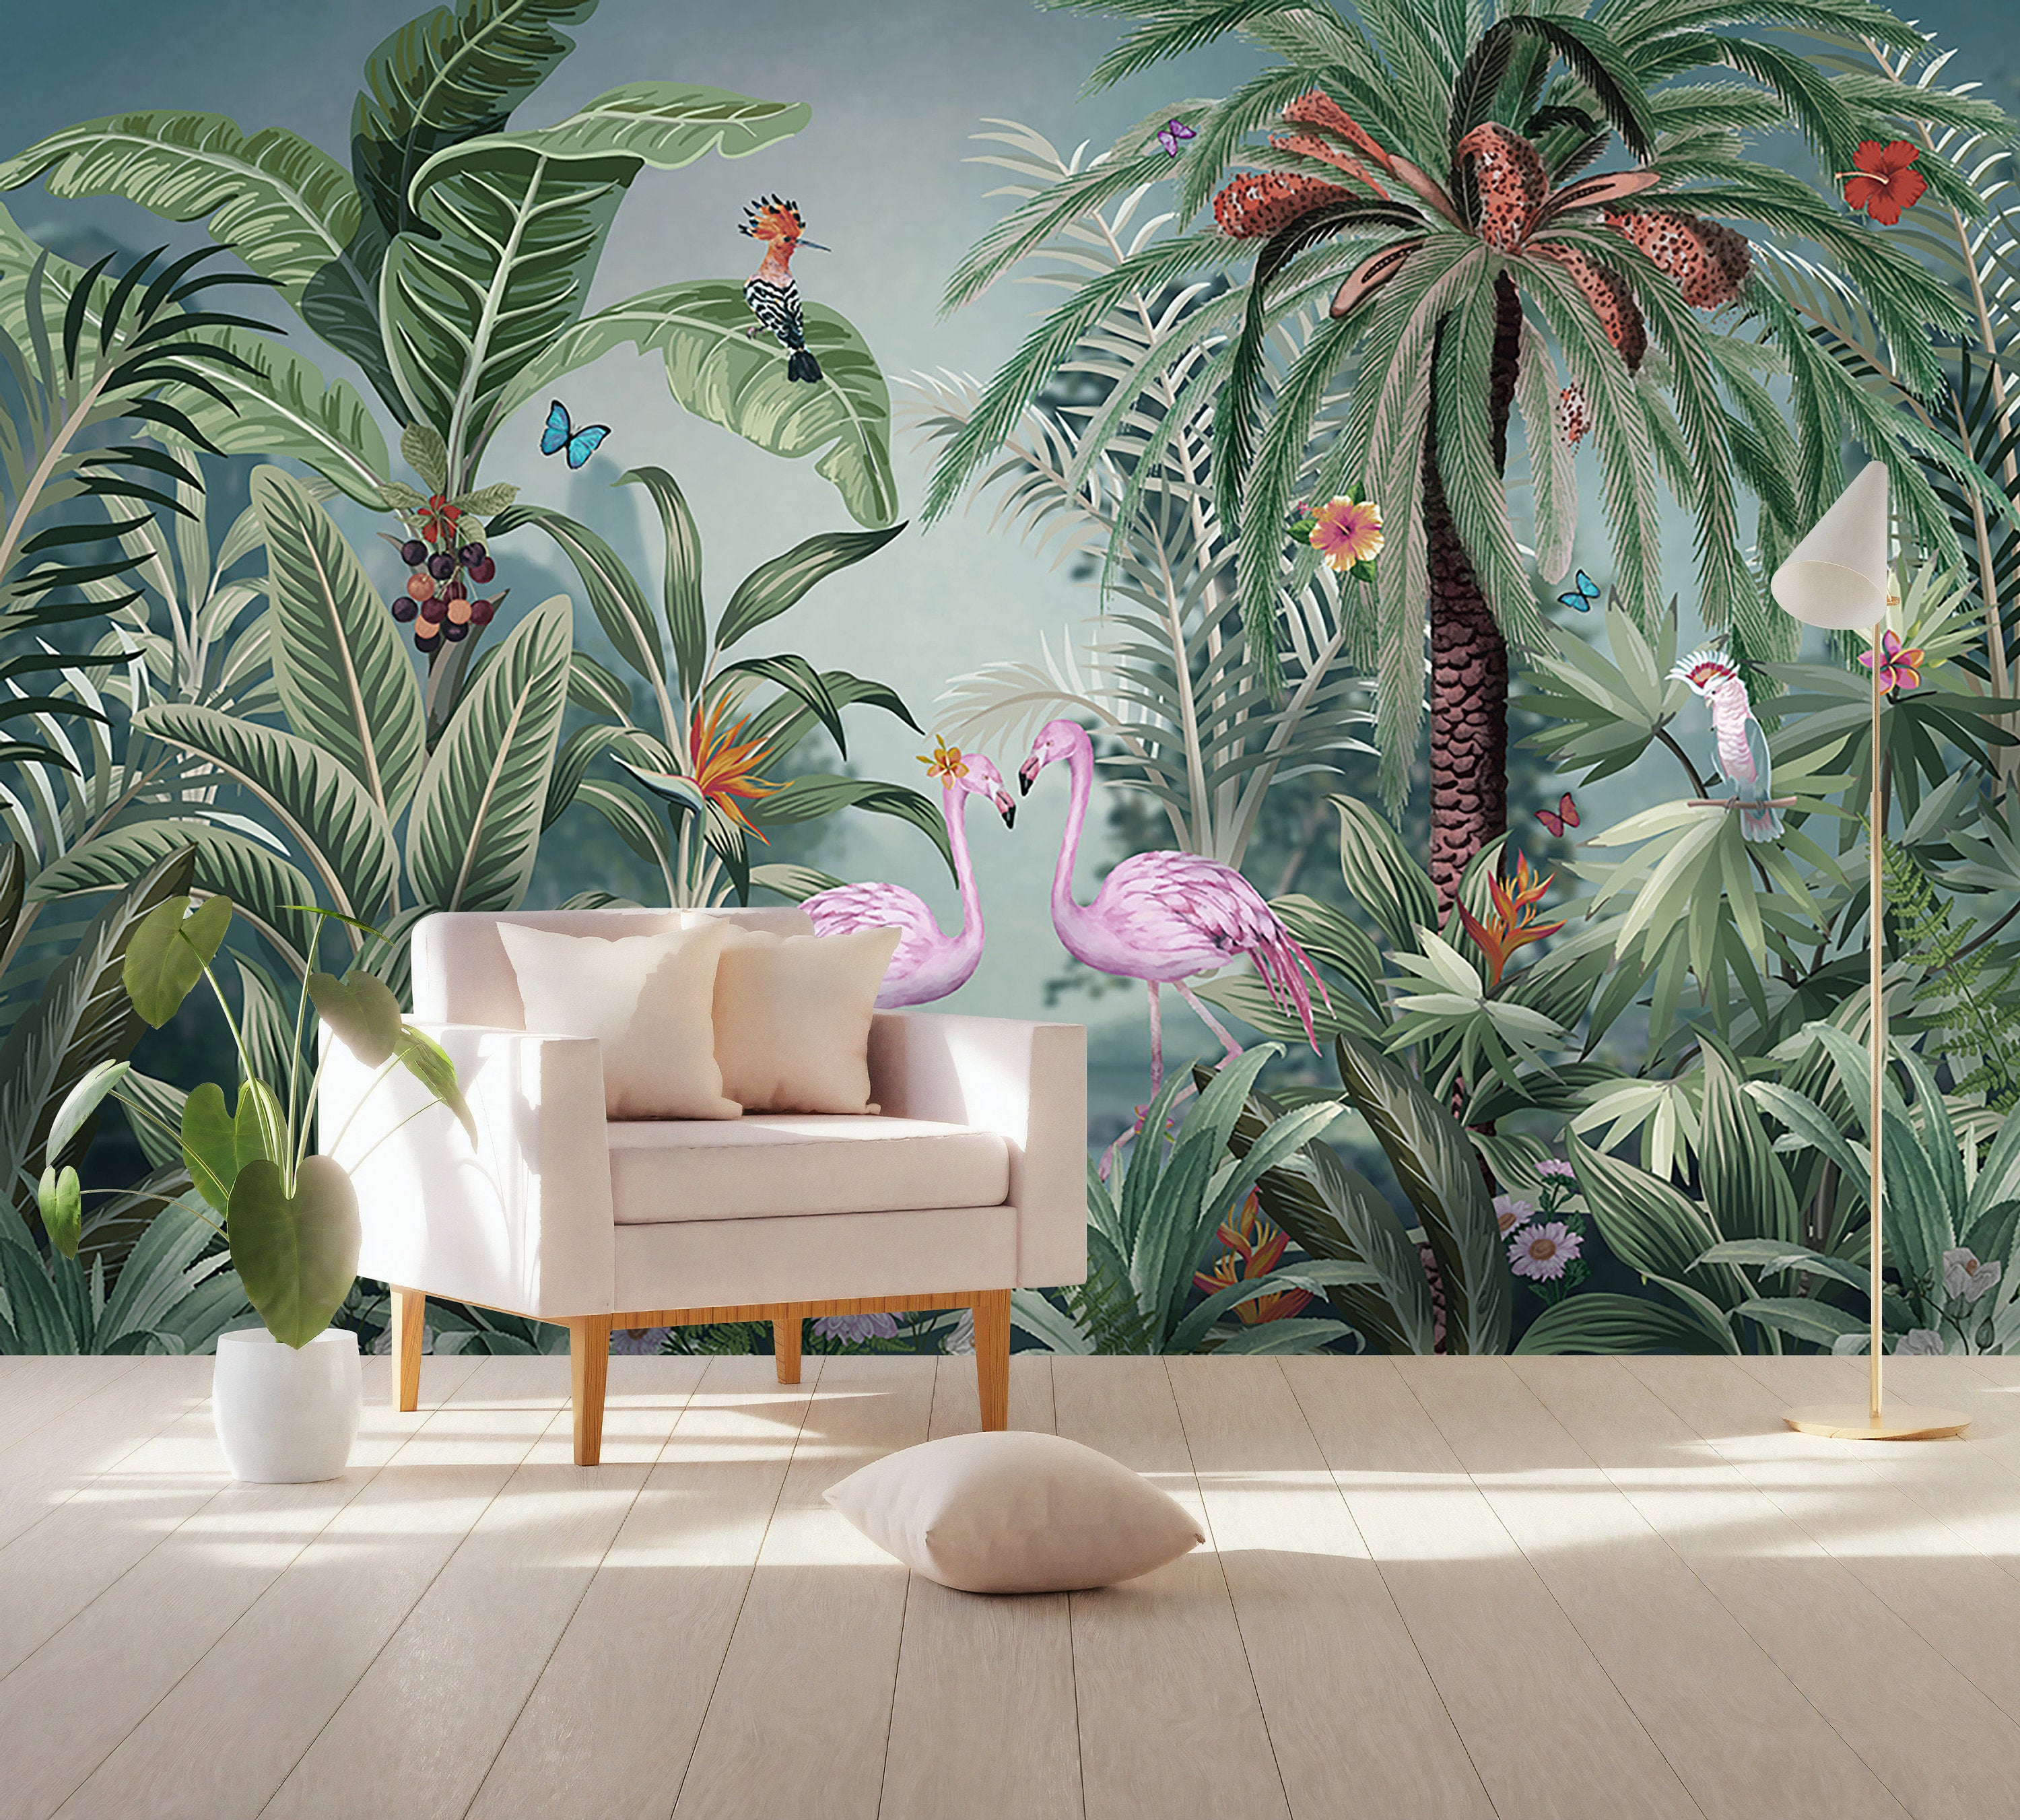 Tropical Jungle Plants Pink Flamingos Exotic Leaves Luxury Wallpaper Self Adhesive Peel and Stick Wall Sticker Wall Decoration Removable